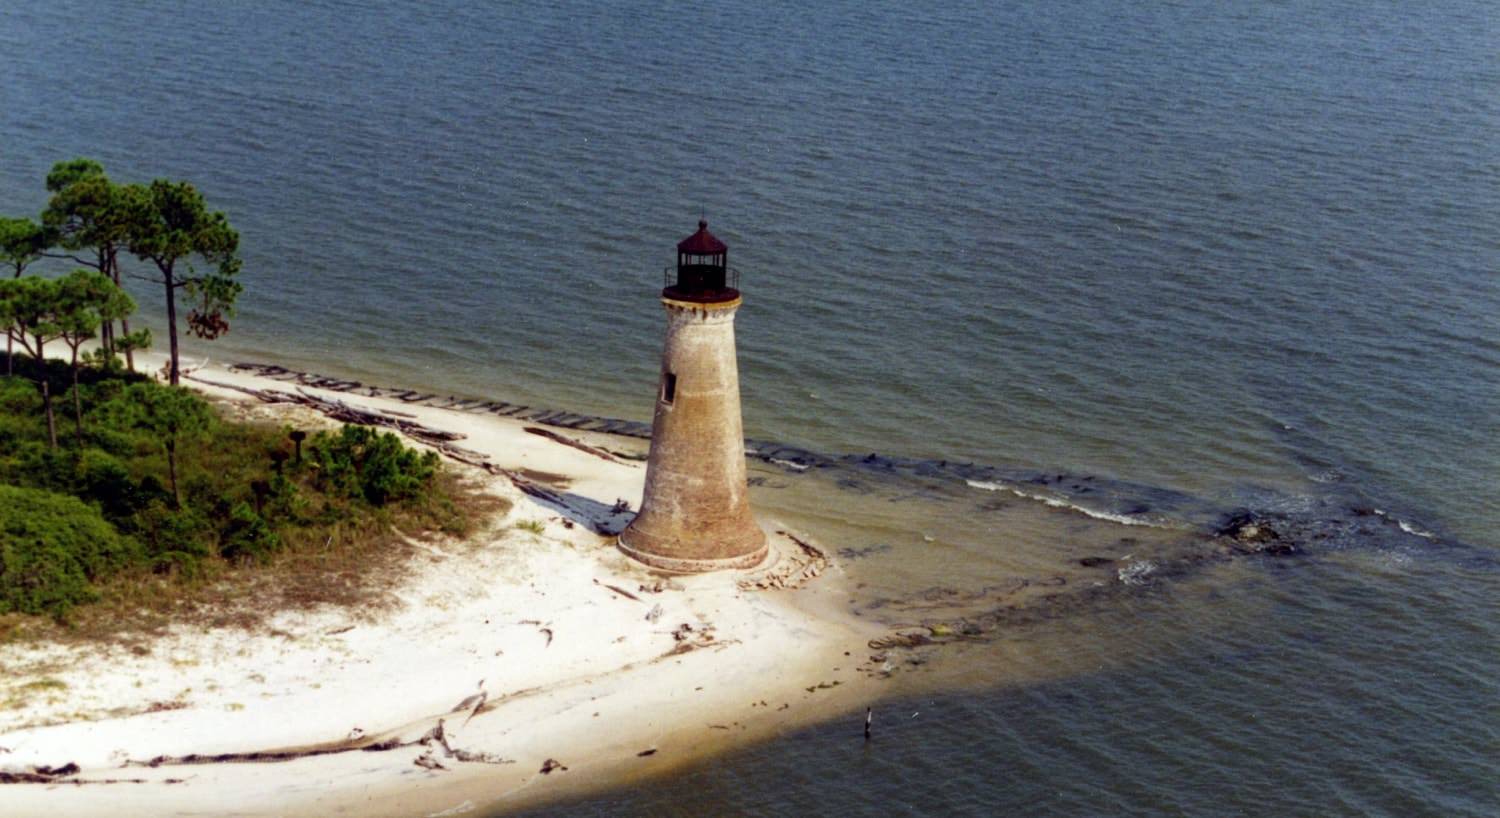 Round Island Lighthouse in its original location on the point of Round Island